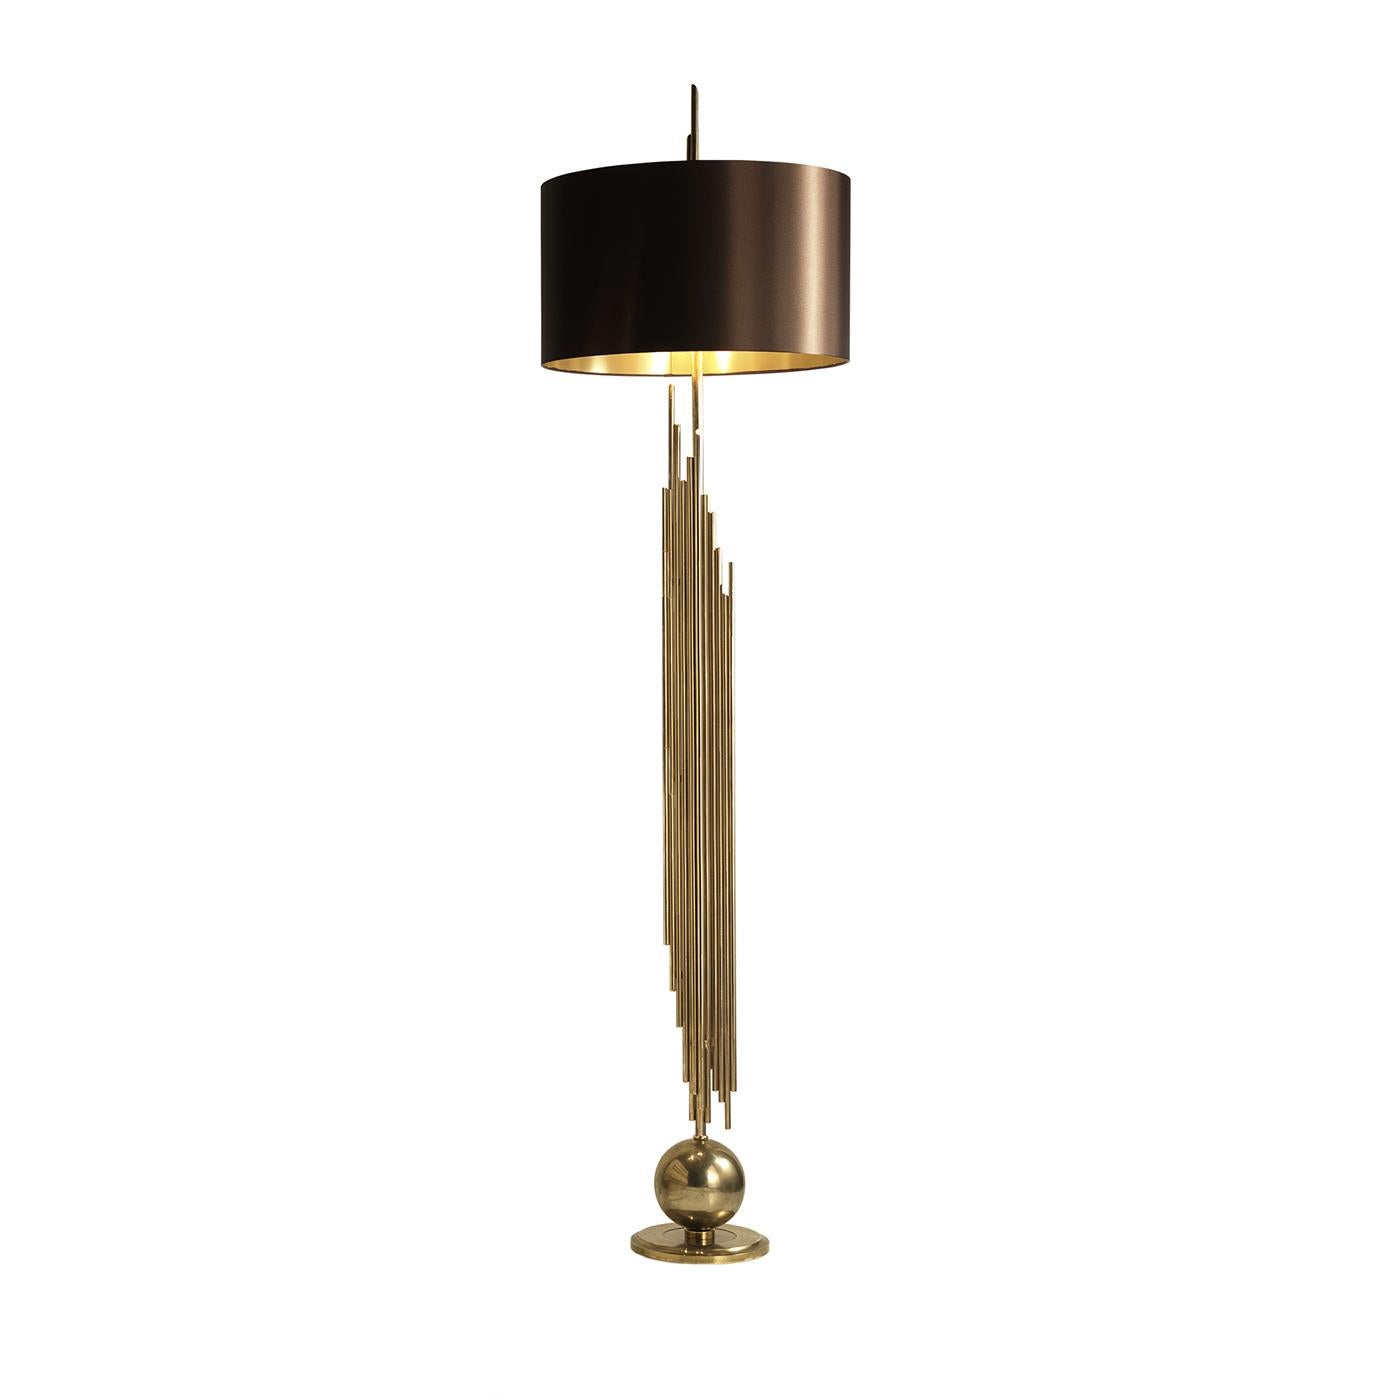 This floor lamp will bring a touch of luxury into the home or office and will elegantly complement any decor. The flat circular base is topped with a spherical element with a configuration of tubular structures. Every component of this lamp was